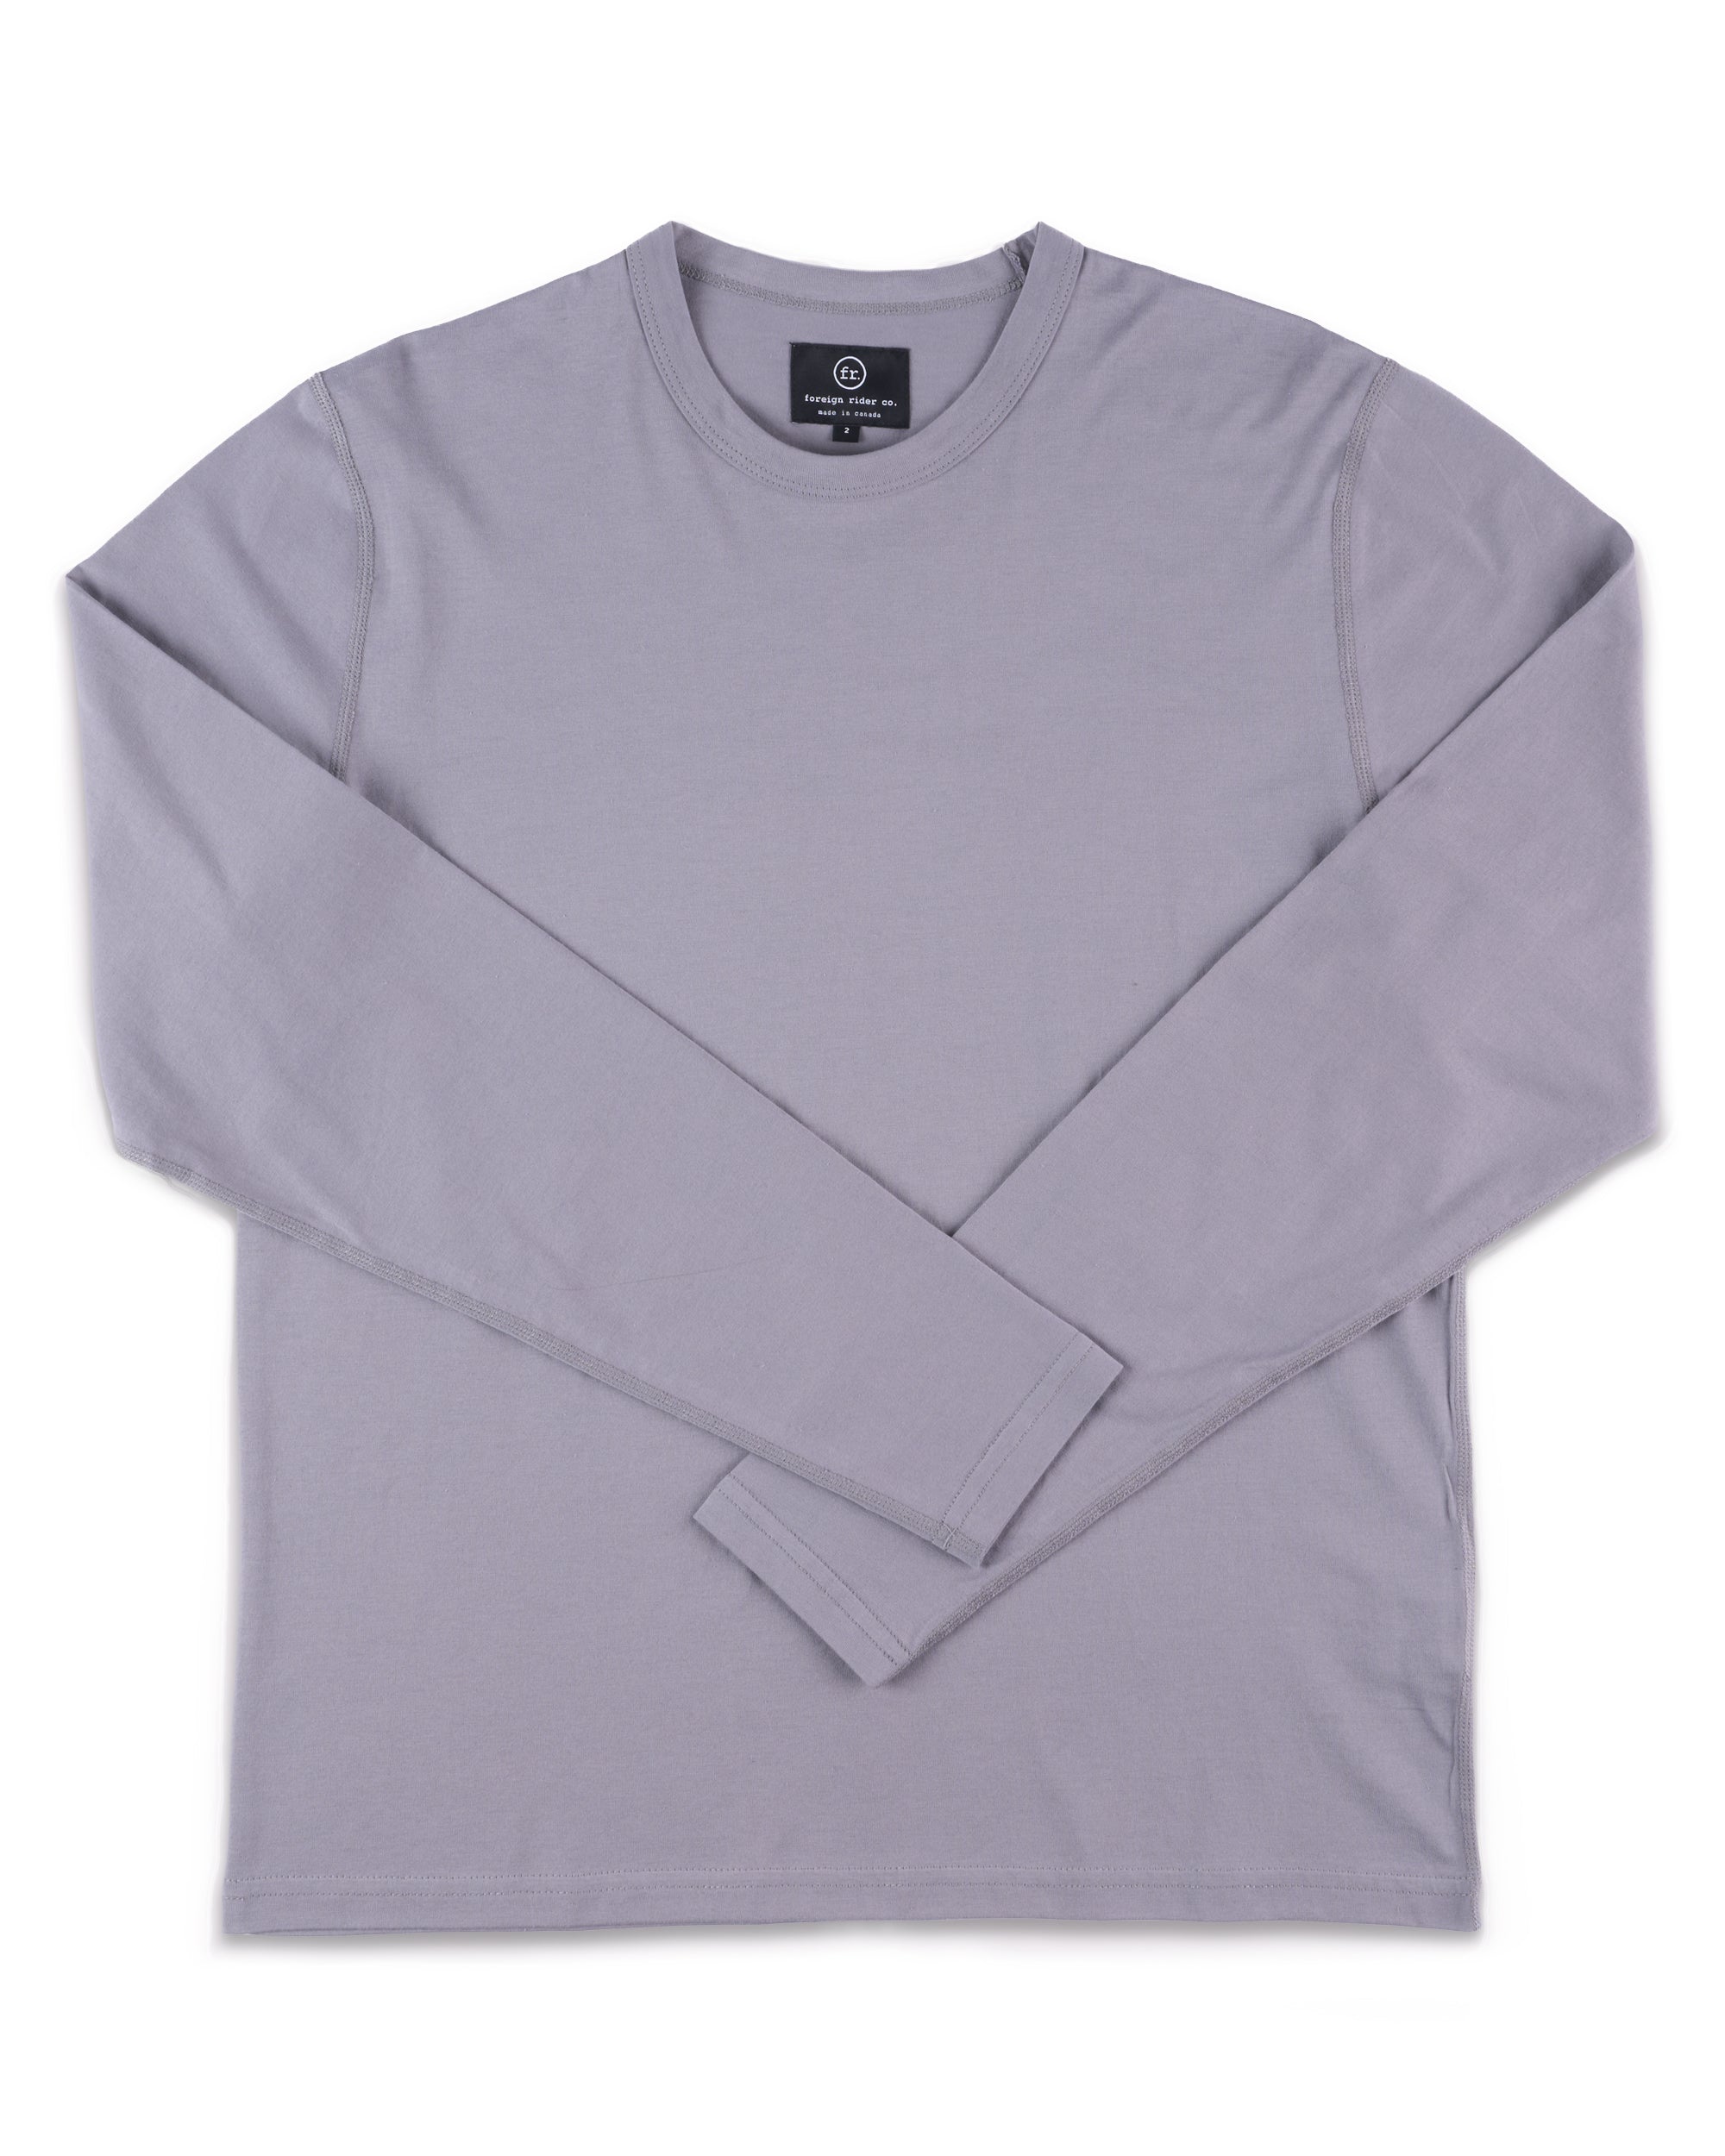 Supima LS T-Shirt Grey - Foreign Rider Co.